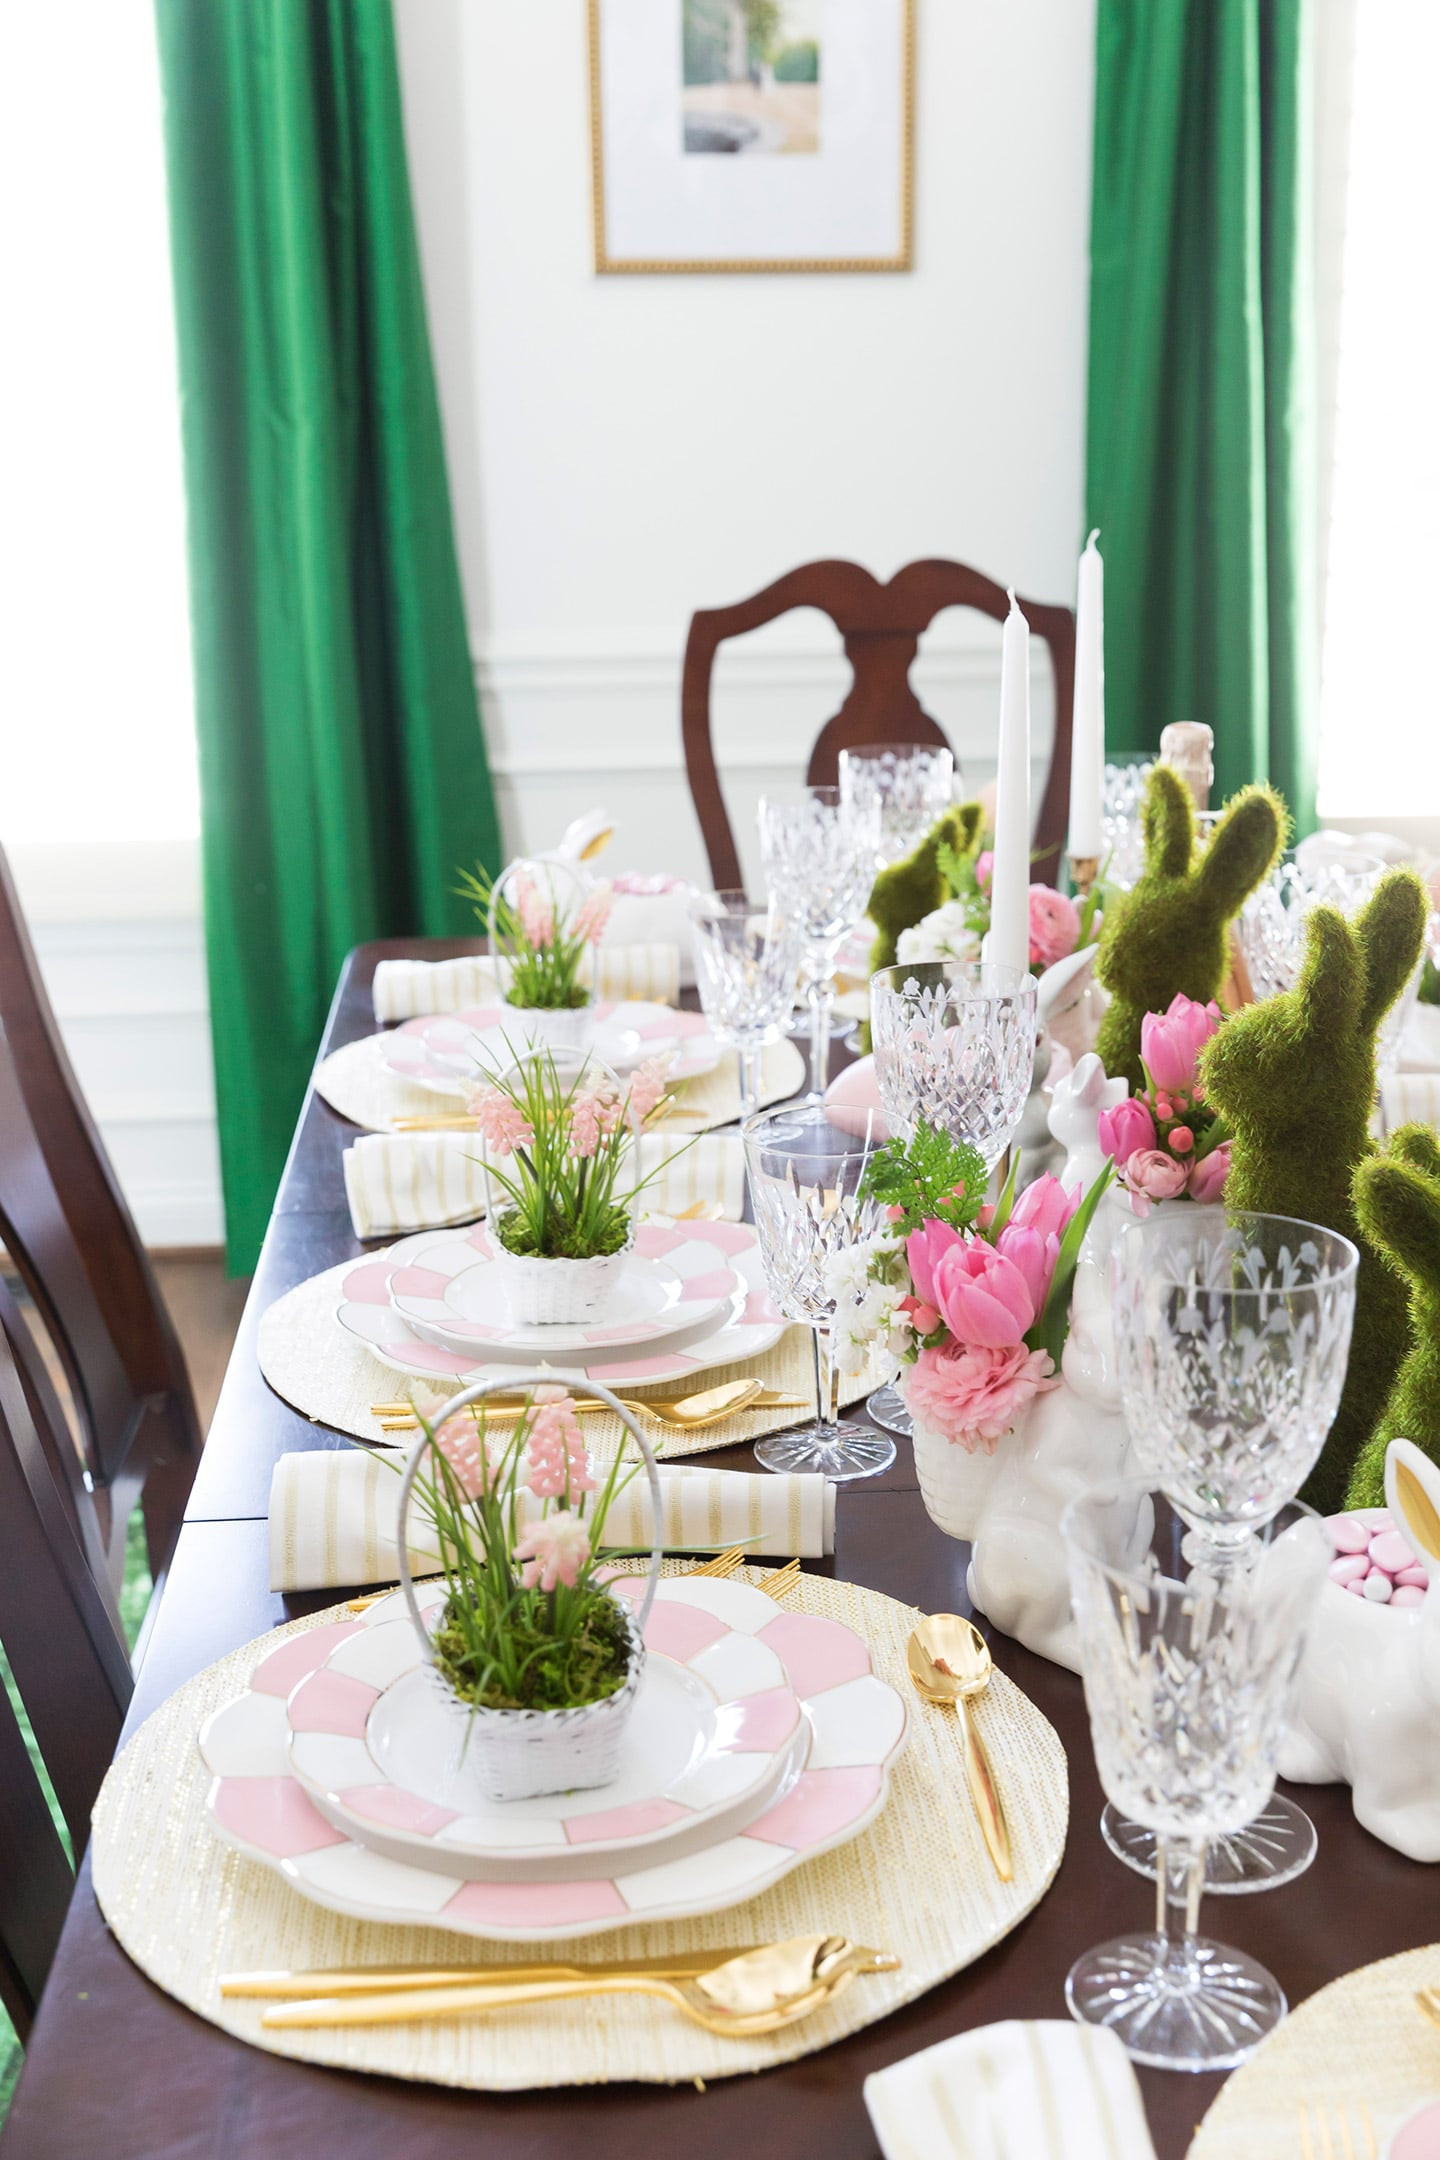 Easter Table Decor
 Easter Table Decorations & Place Setting Ideas